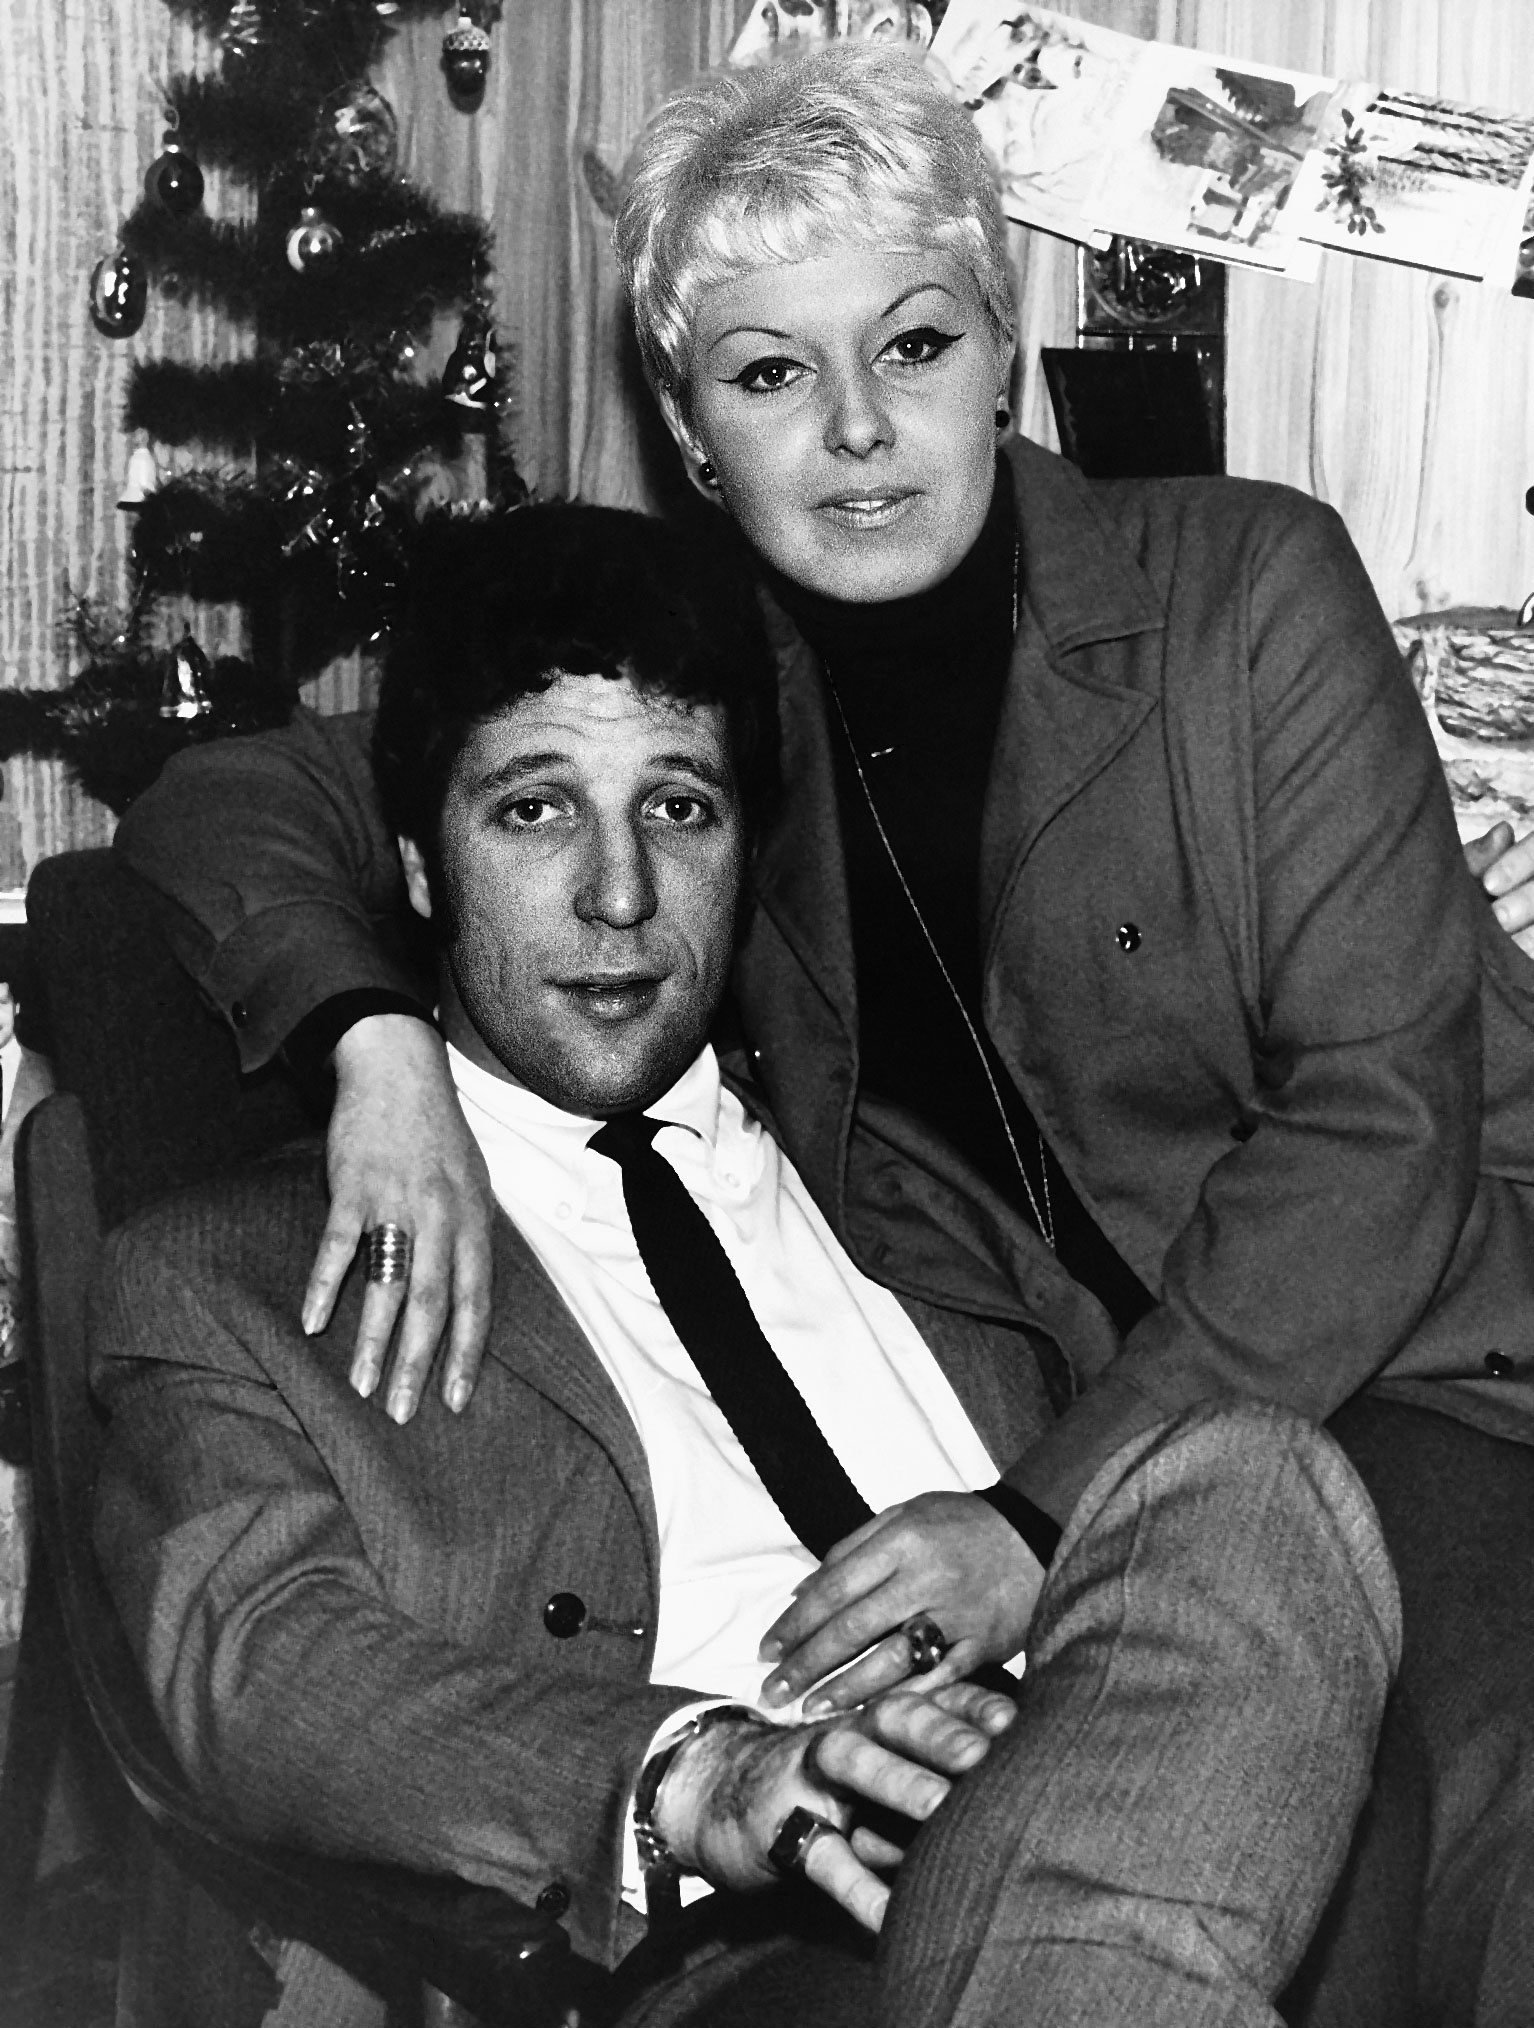 Tom Jones and Melinda Trenchard at home in Wales on January 3, 1967 | Source: Getty Images